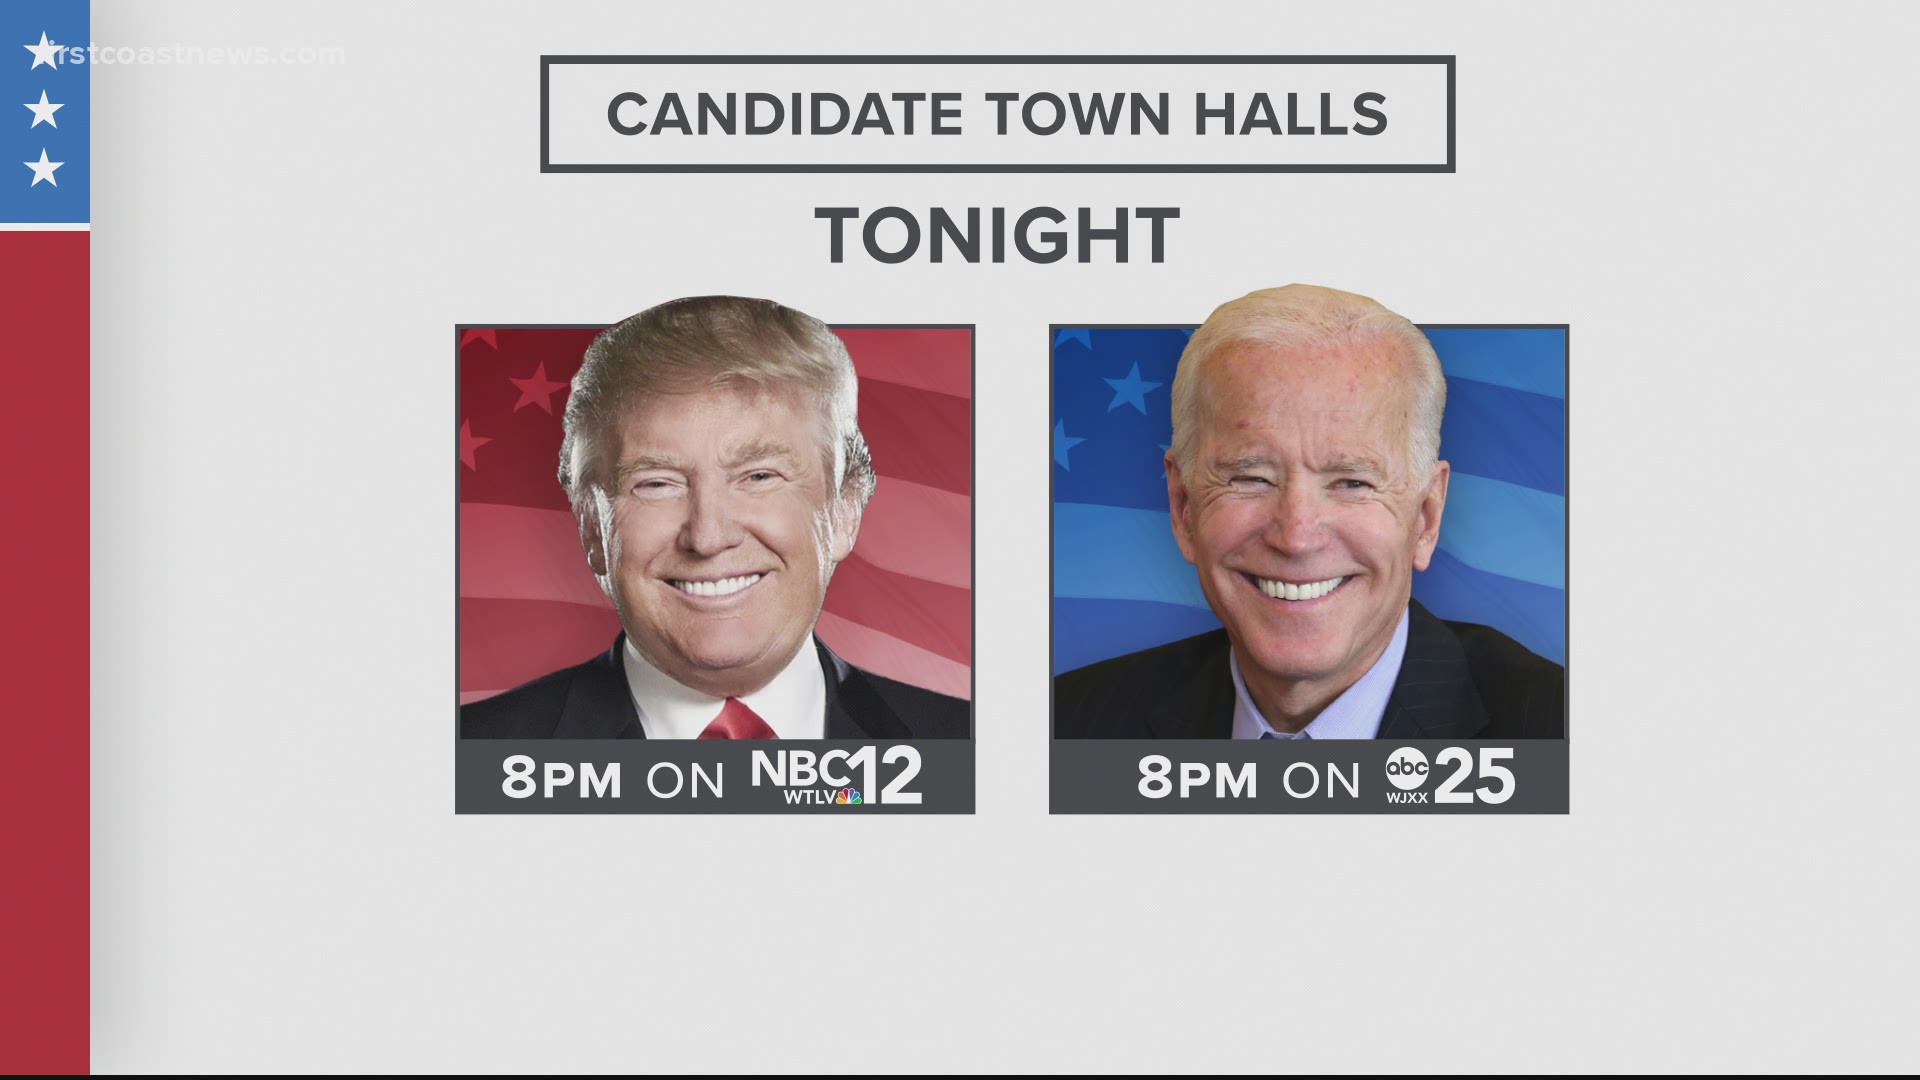 President Donald Trump will be holding a Town Hall on NBC 12 while former Vice President Joe Biden will be on ABC 25 instead of the two debating.